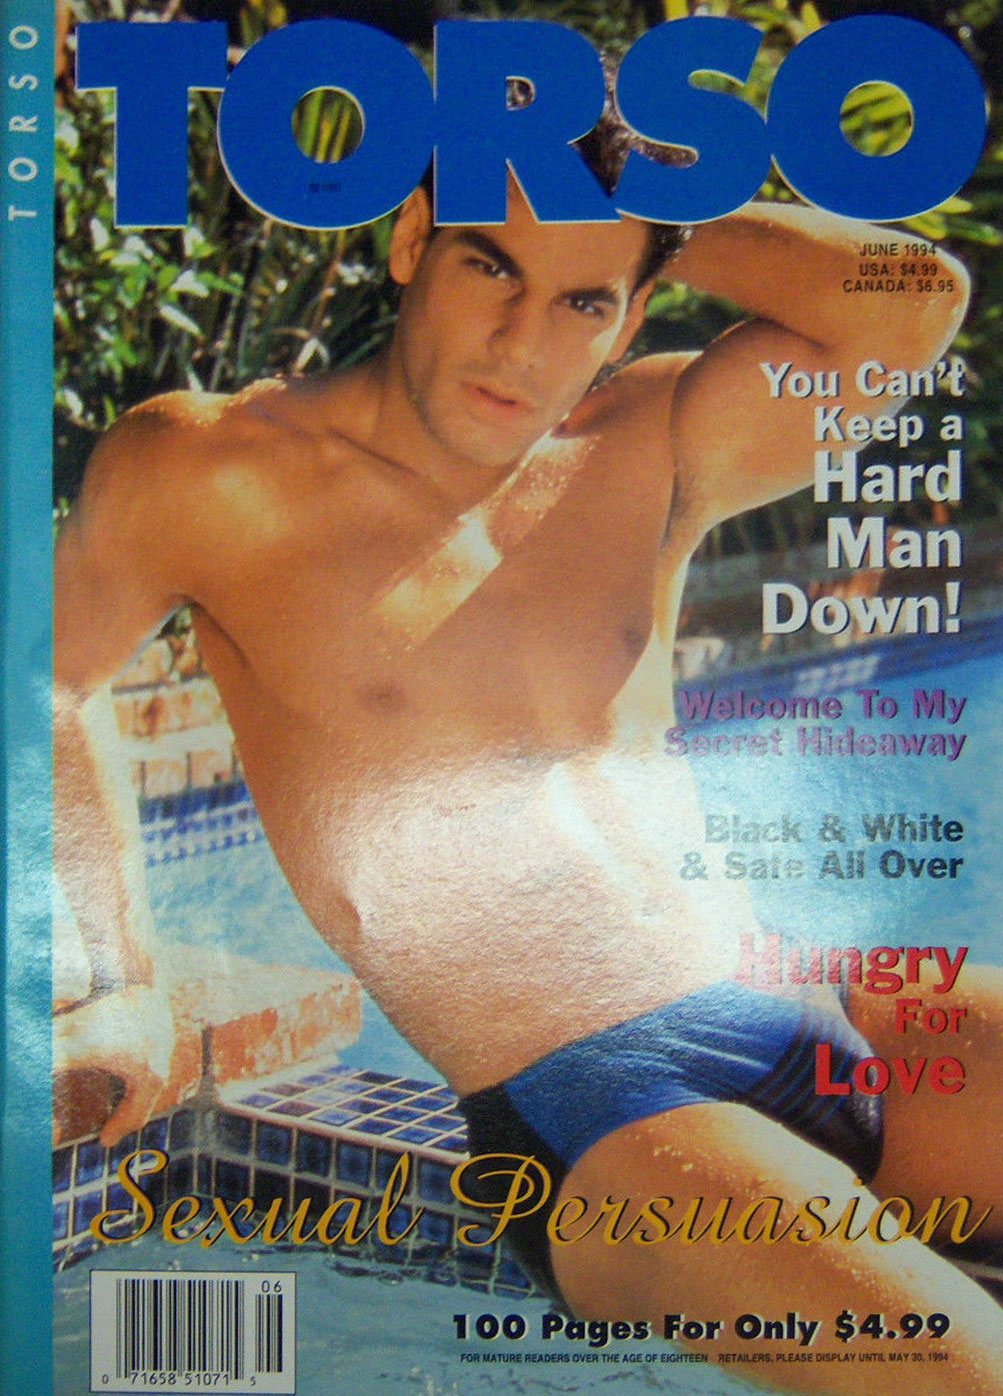 Torso June 1994 magazine back issue Torso magizine back copy Torso June 1994 Gay Adult Magazine Back Issue Naked Men Published by Torso Publishing Group. You Can't Keep A Hard Man Down!.